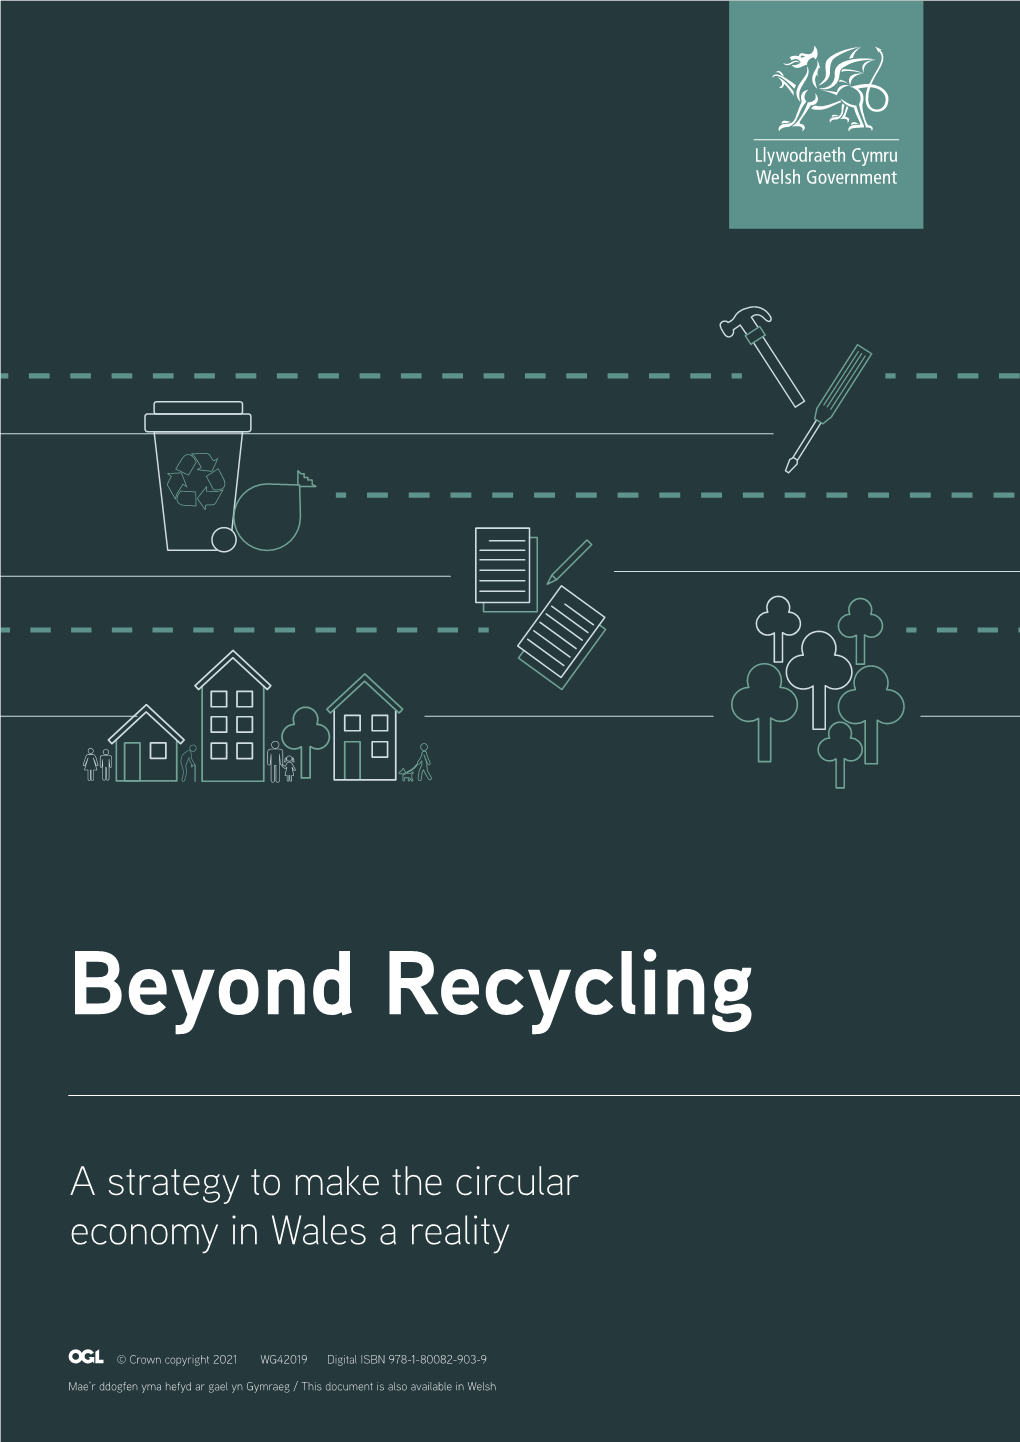 Beyond Recycling: a Strategy to Make the Circular Economy in Wales